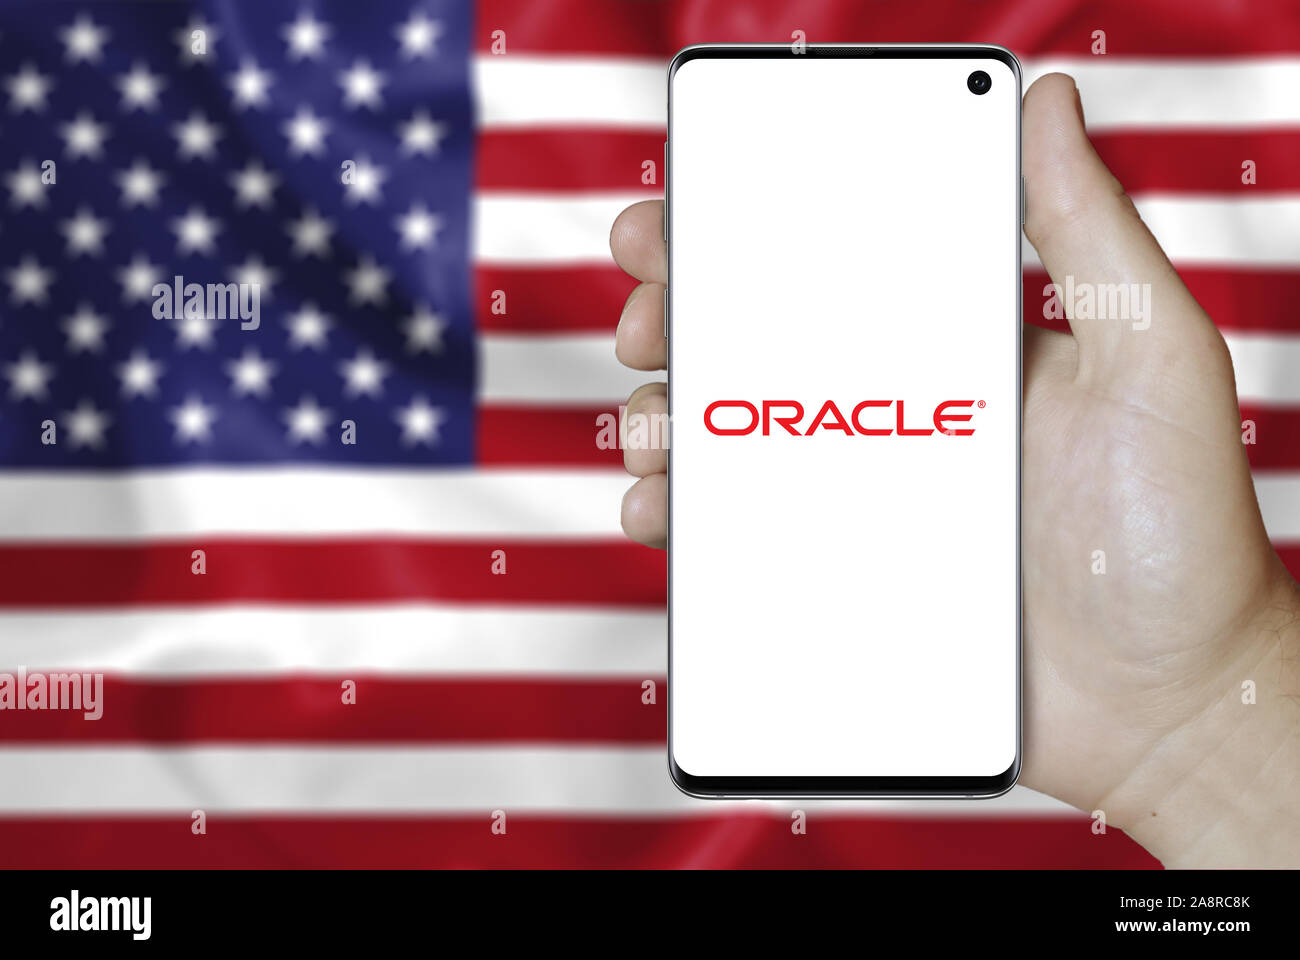 Logo of public company Oracle Corp. displayed on a smartphone. Flag of USA background. Credit: PIXDUCE Stock Photo